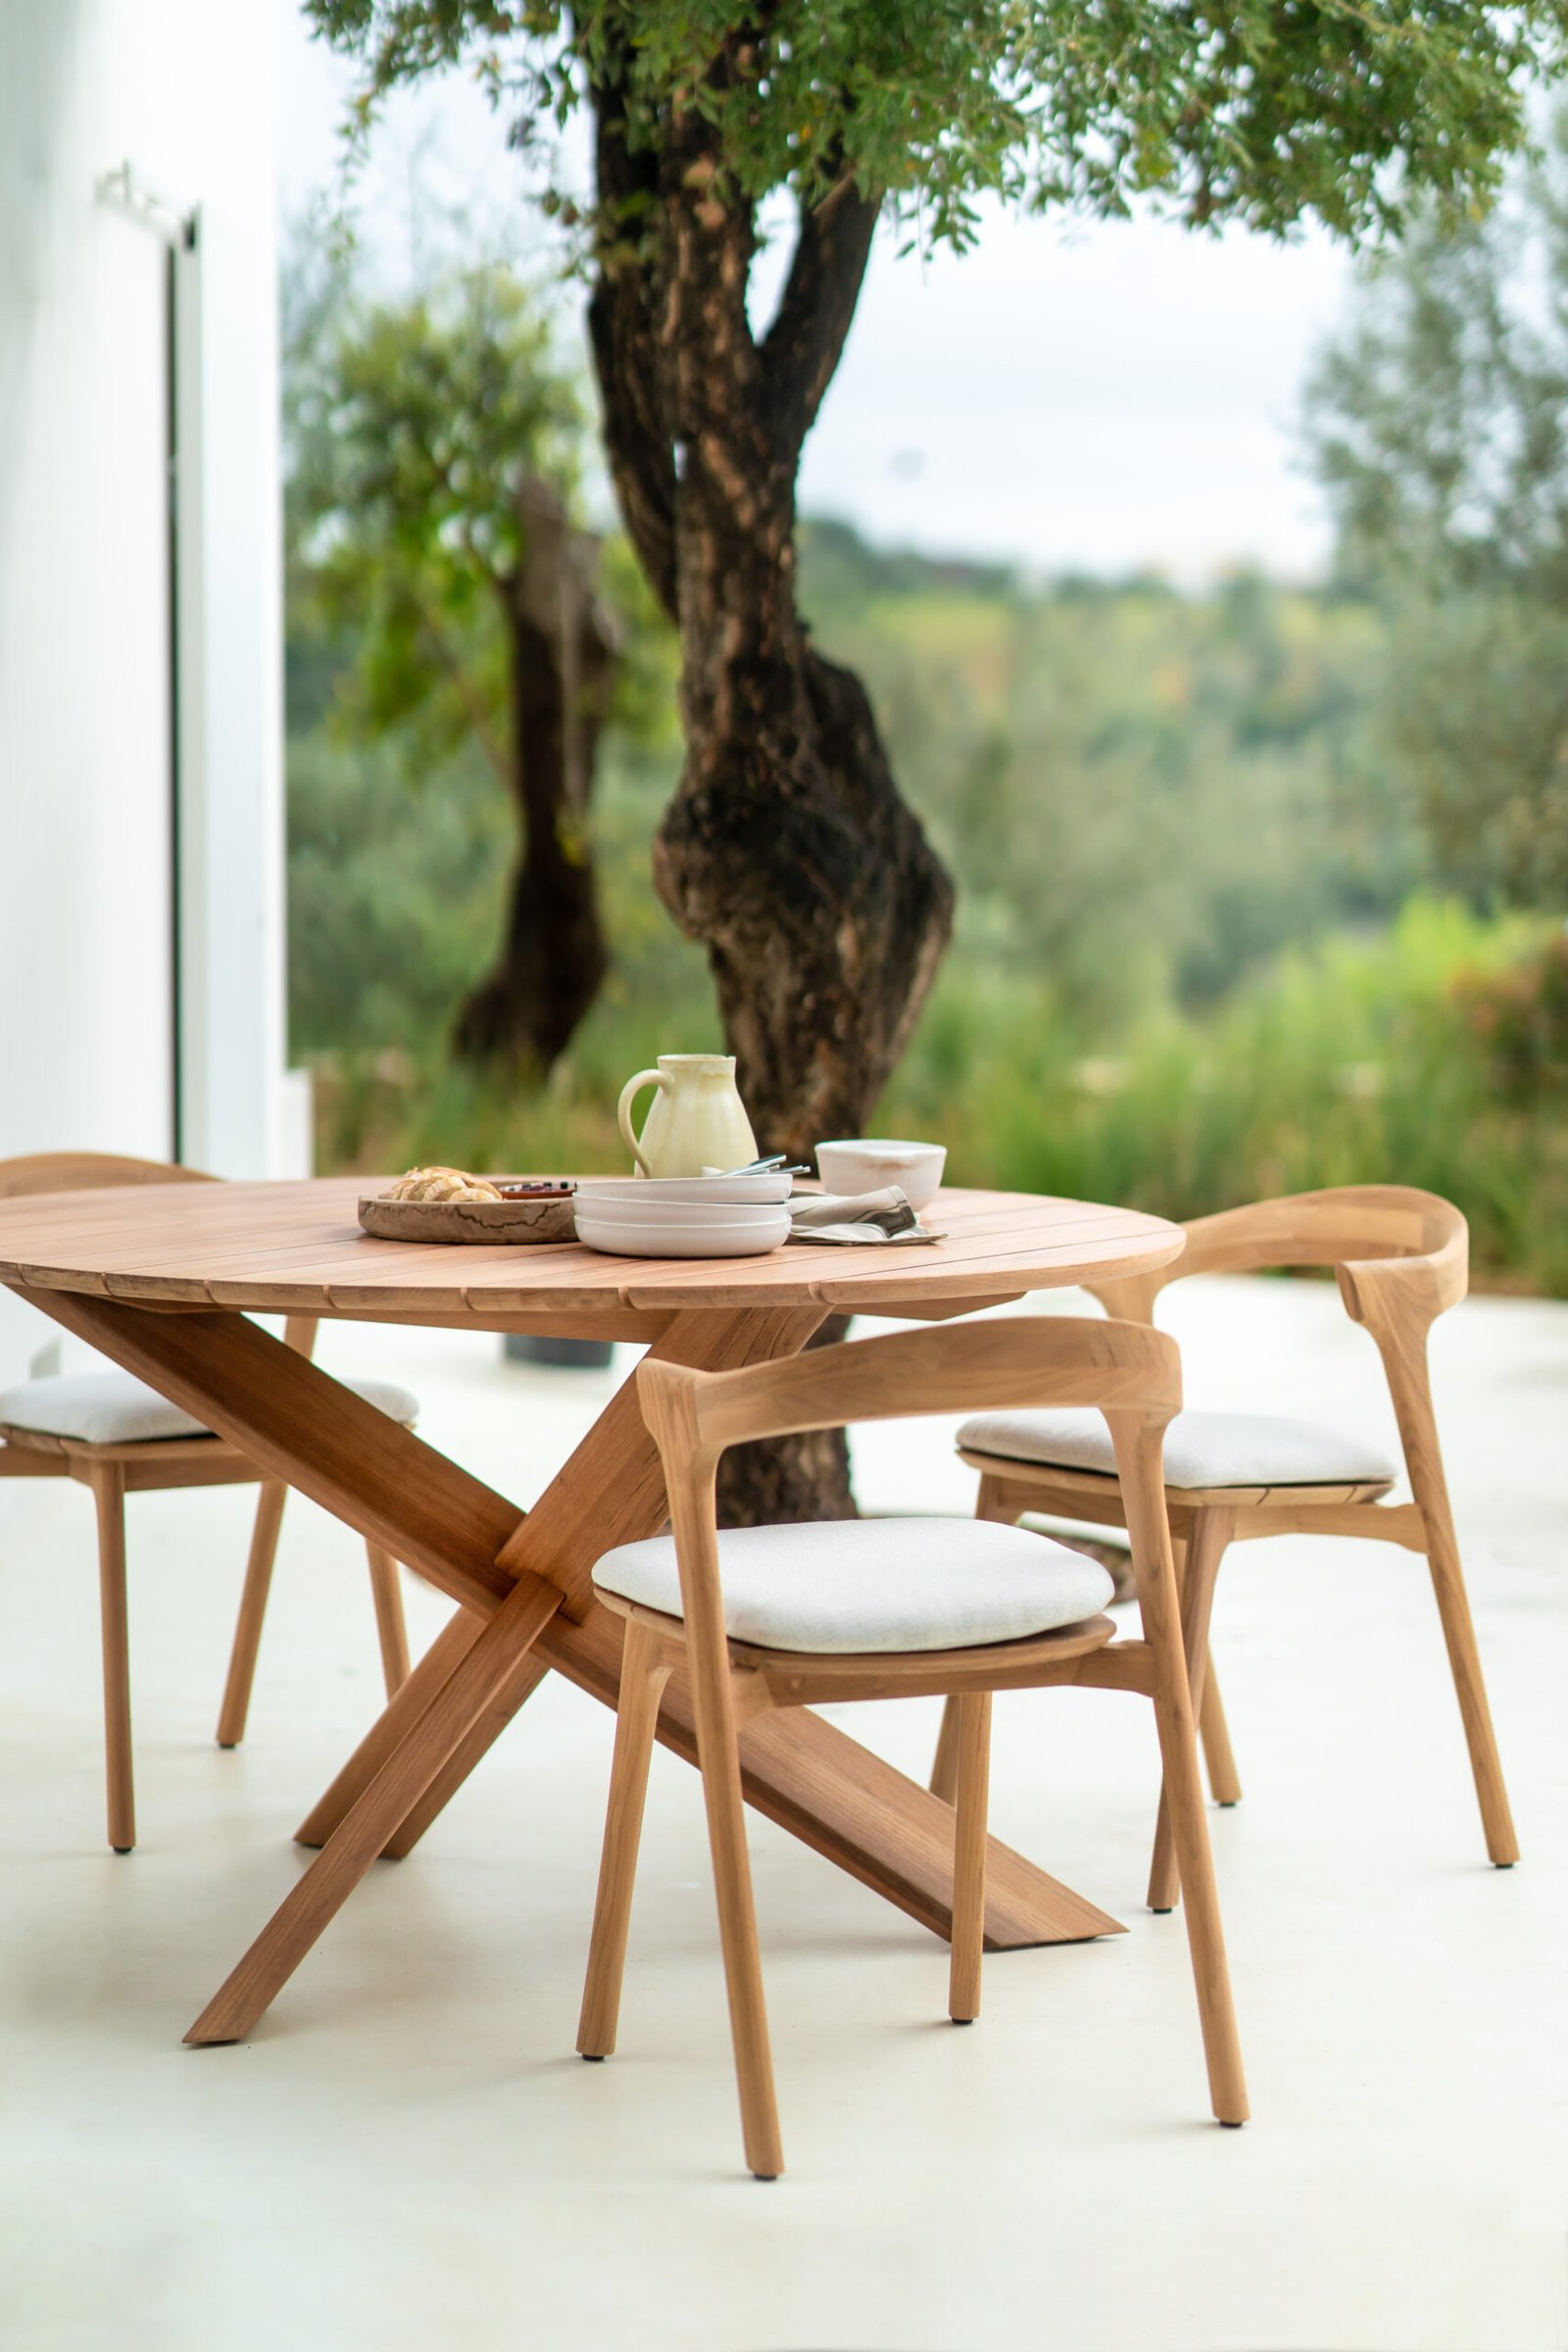 oliveira outdoor living outdoor dining chairs